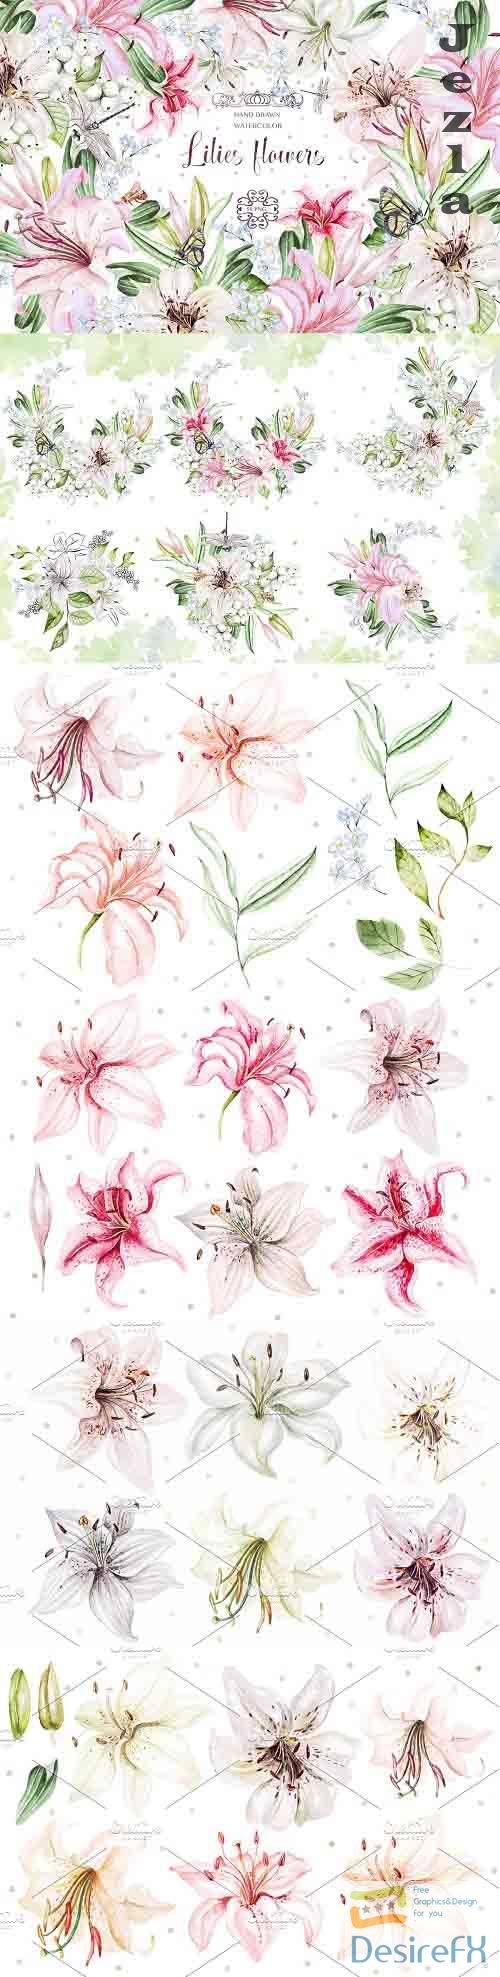 Hand Drawn watercolor flowers lily 2 - 5016942